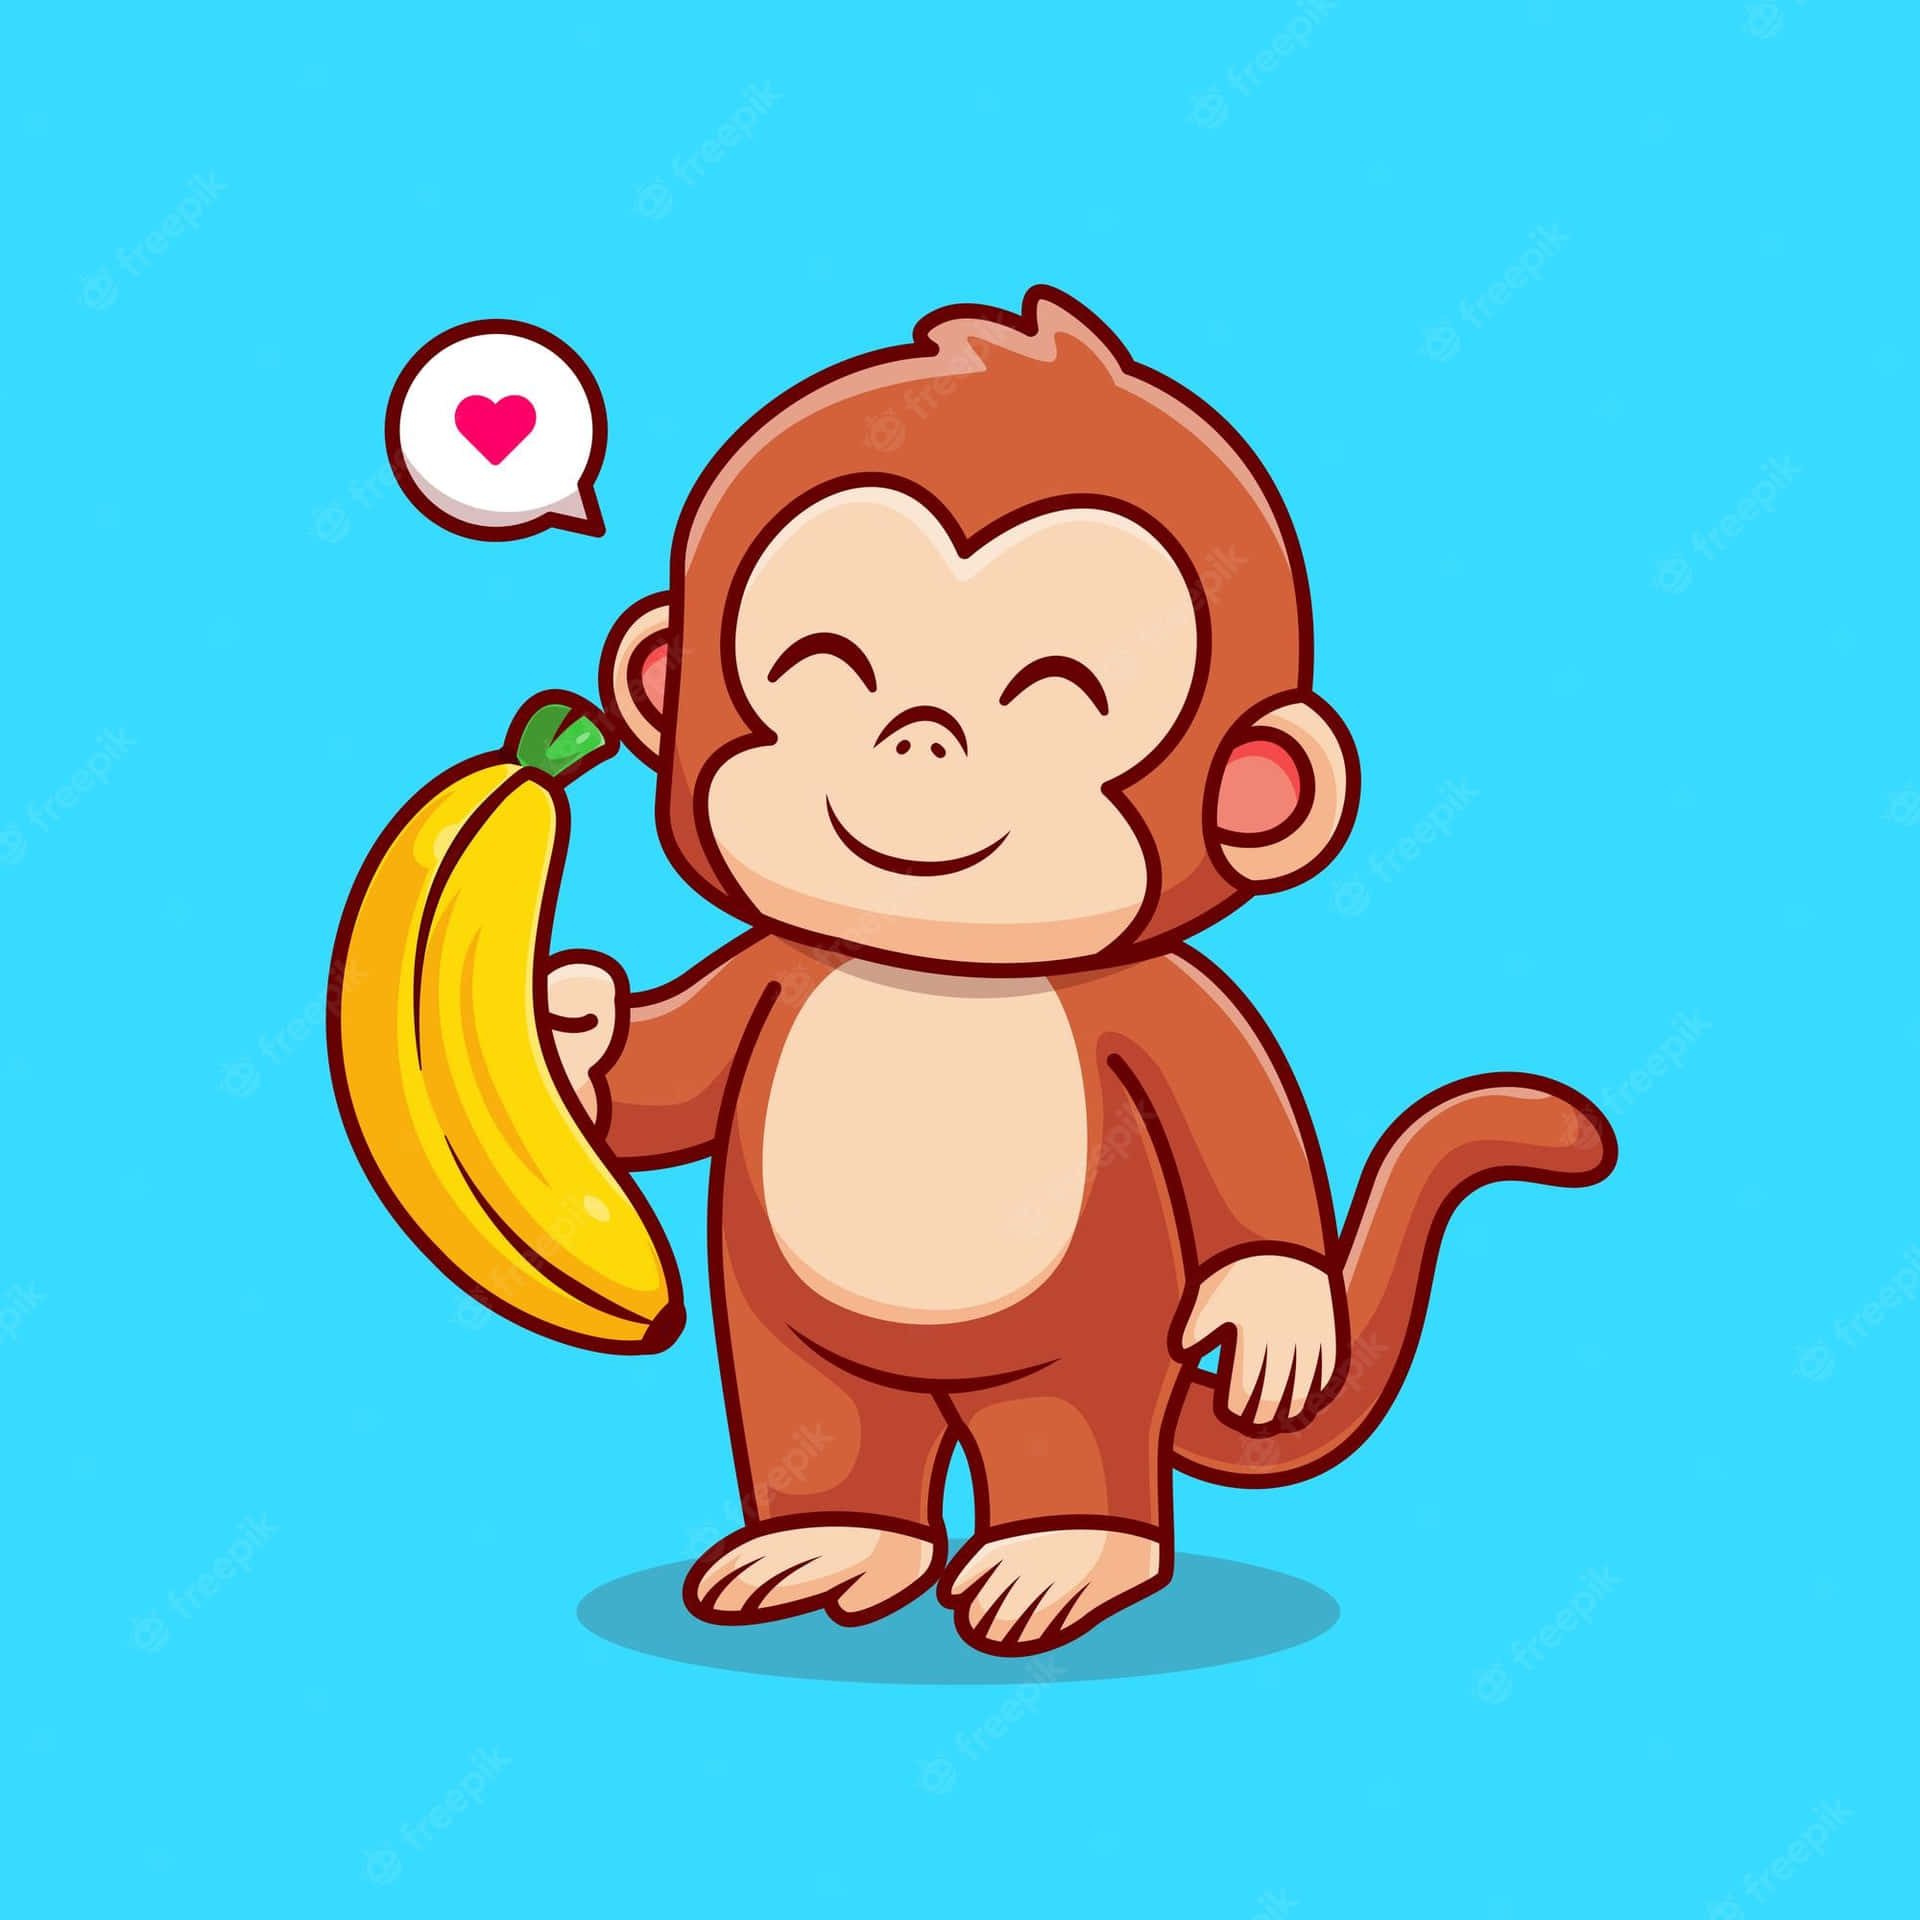 This cute monkey can't wait to start their day!